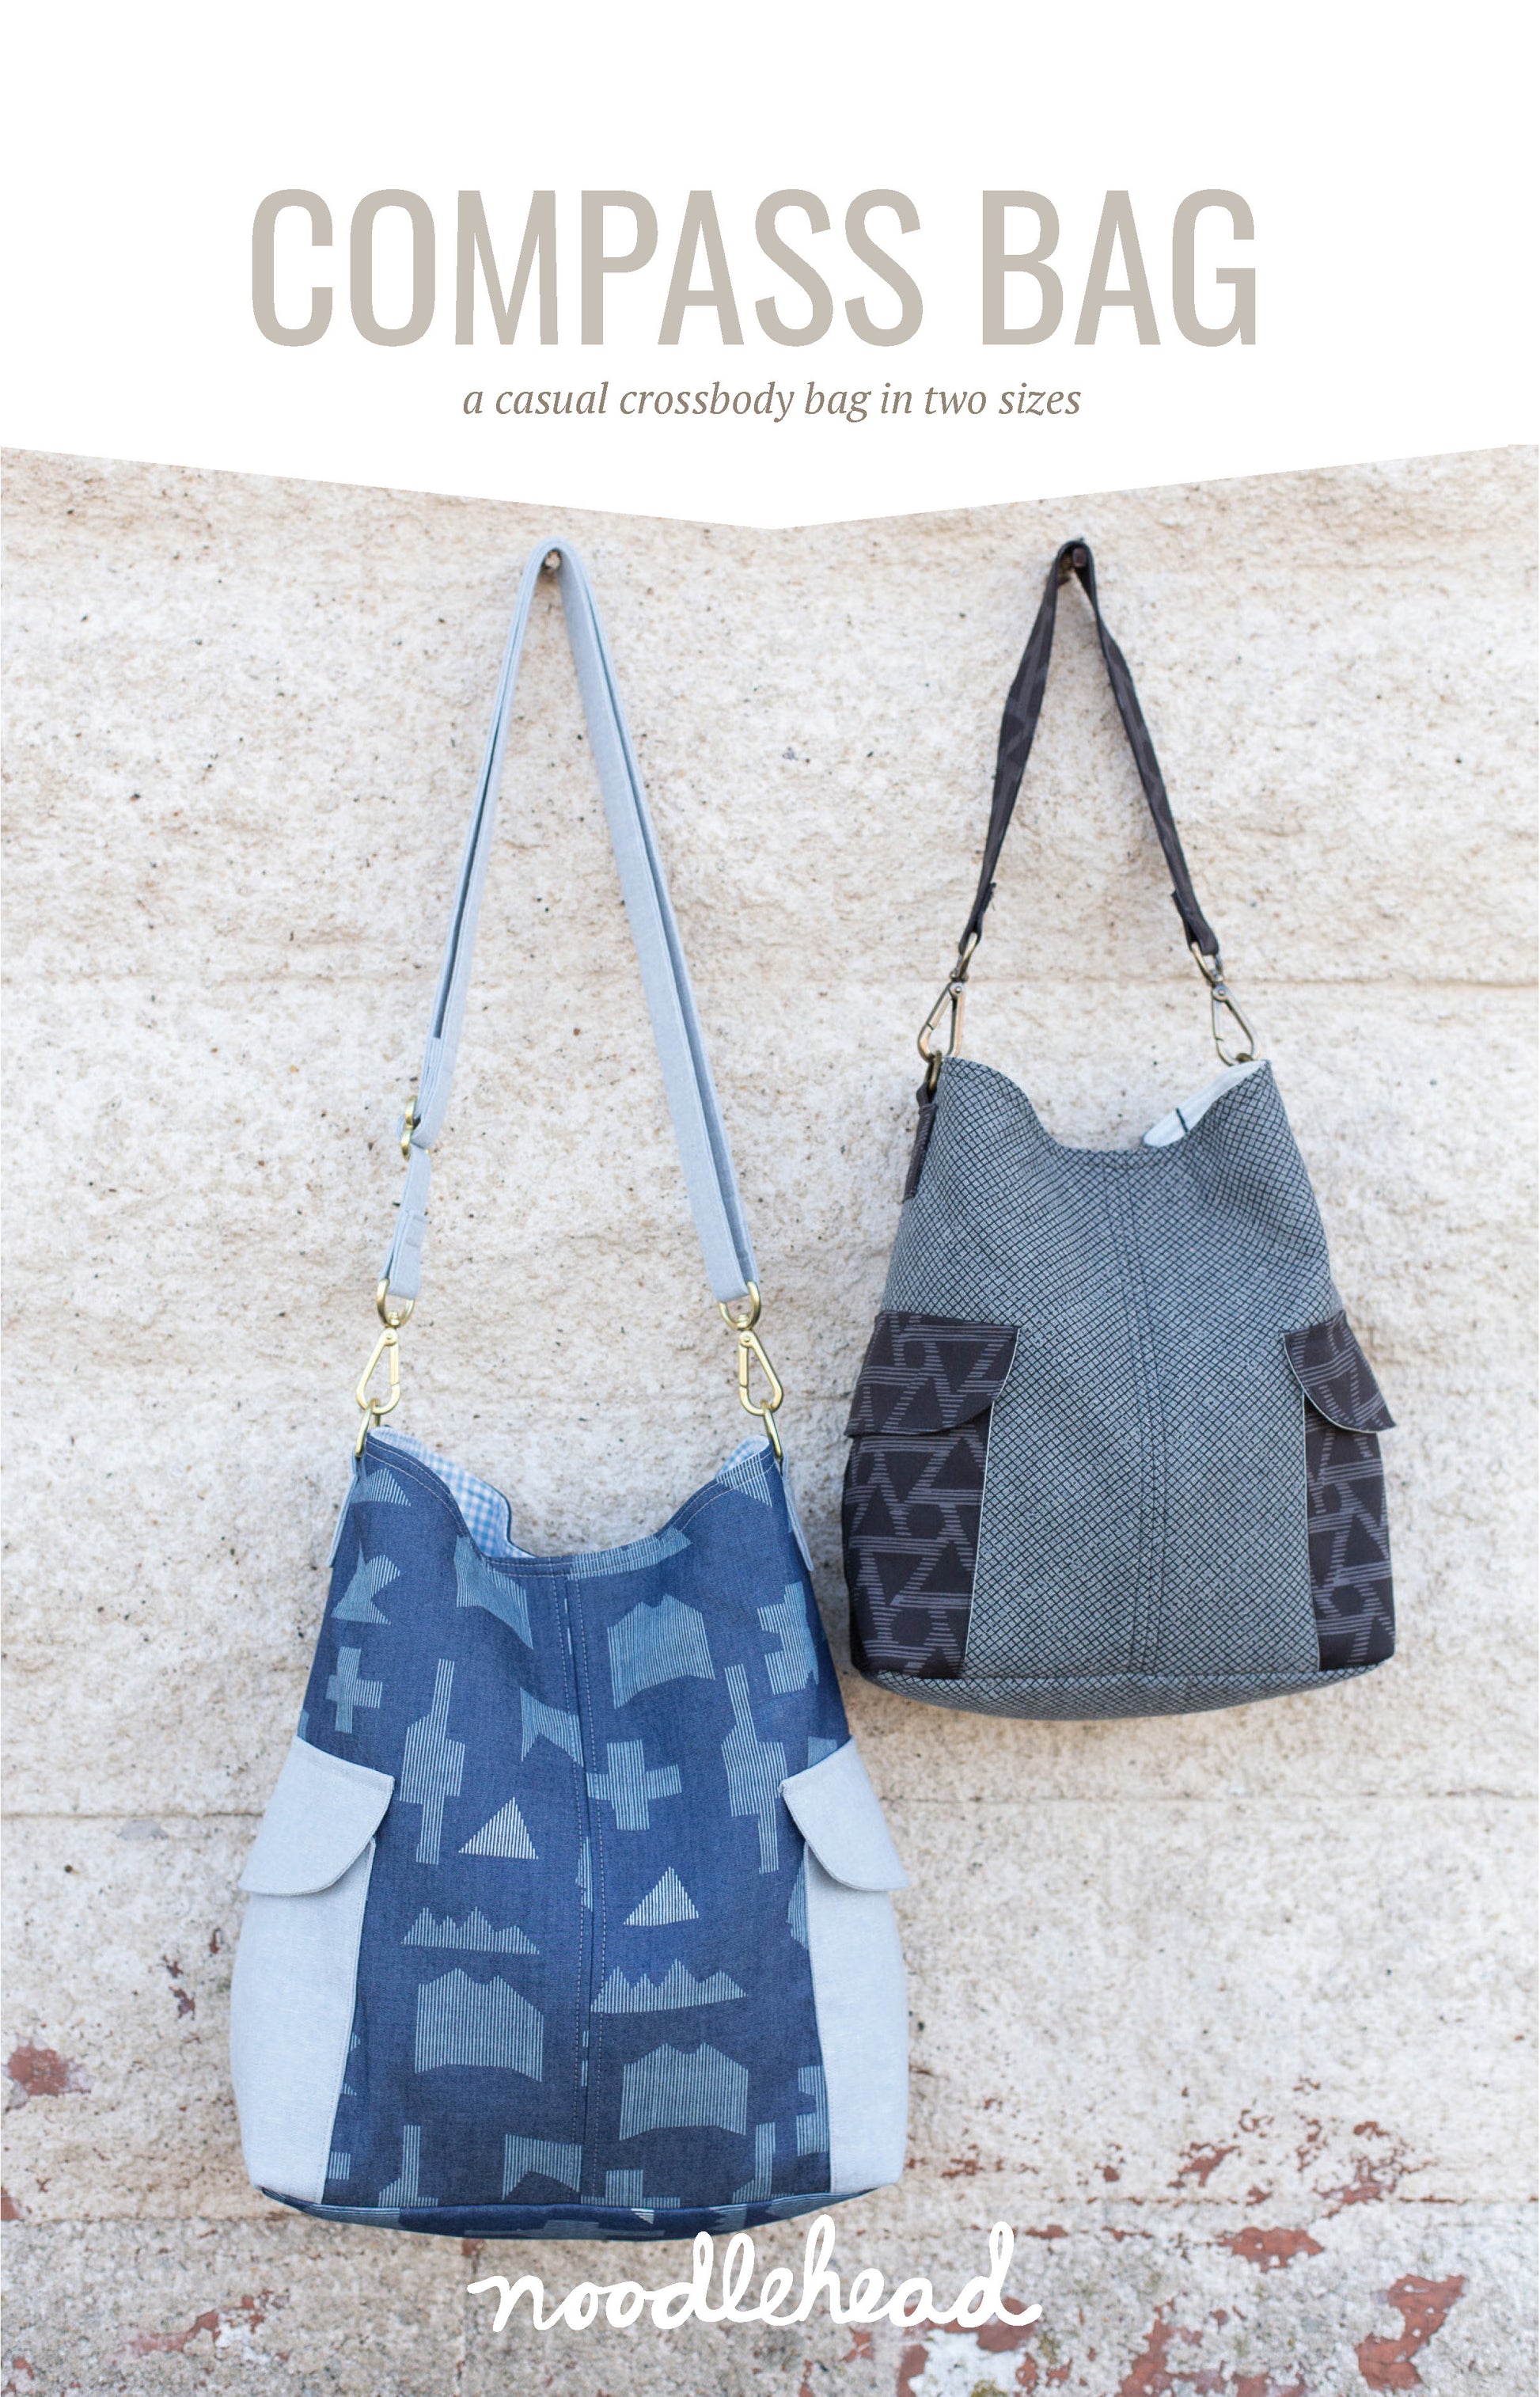 Compass Bag Sewing Pattern by Noodlehead